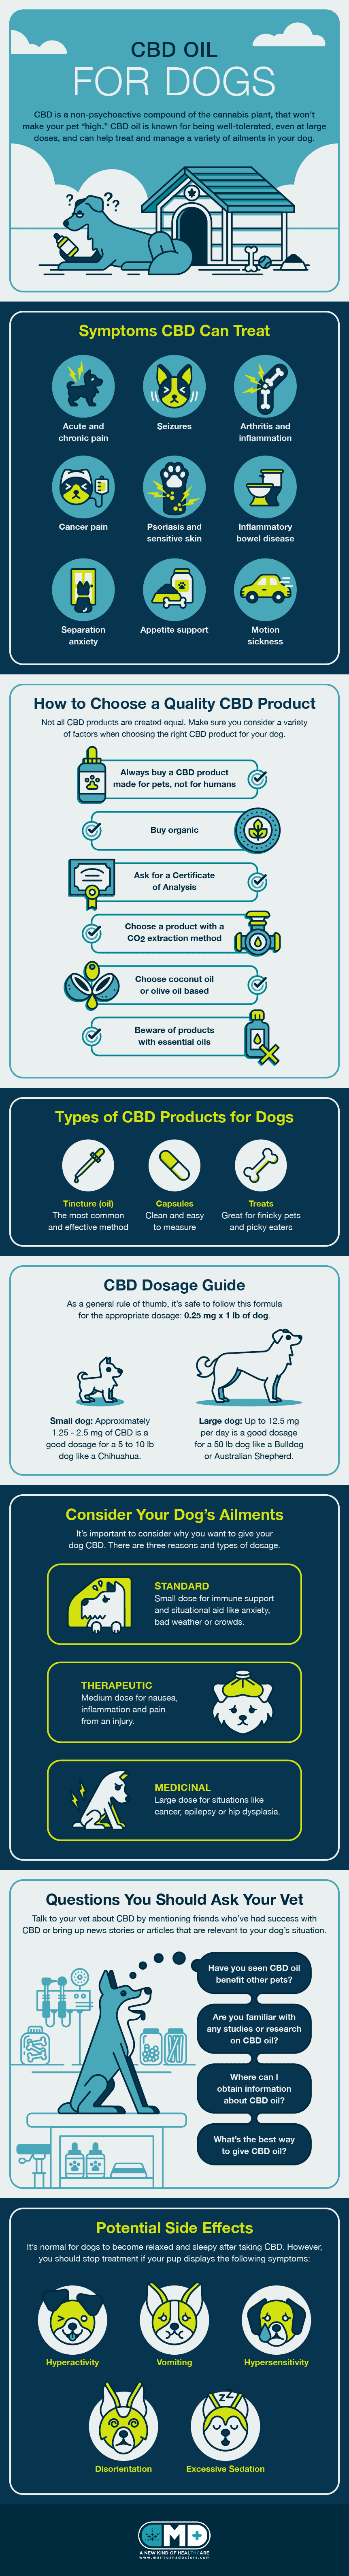 cbd oil for dogs graphic